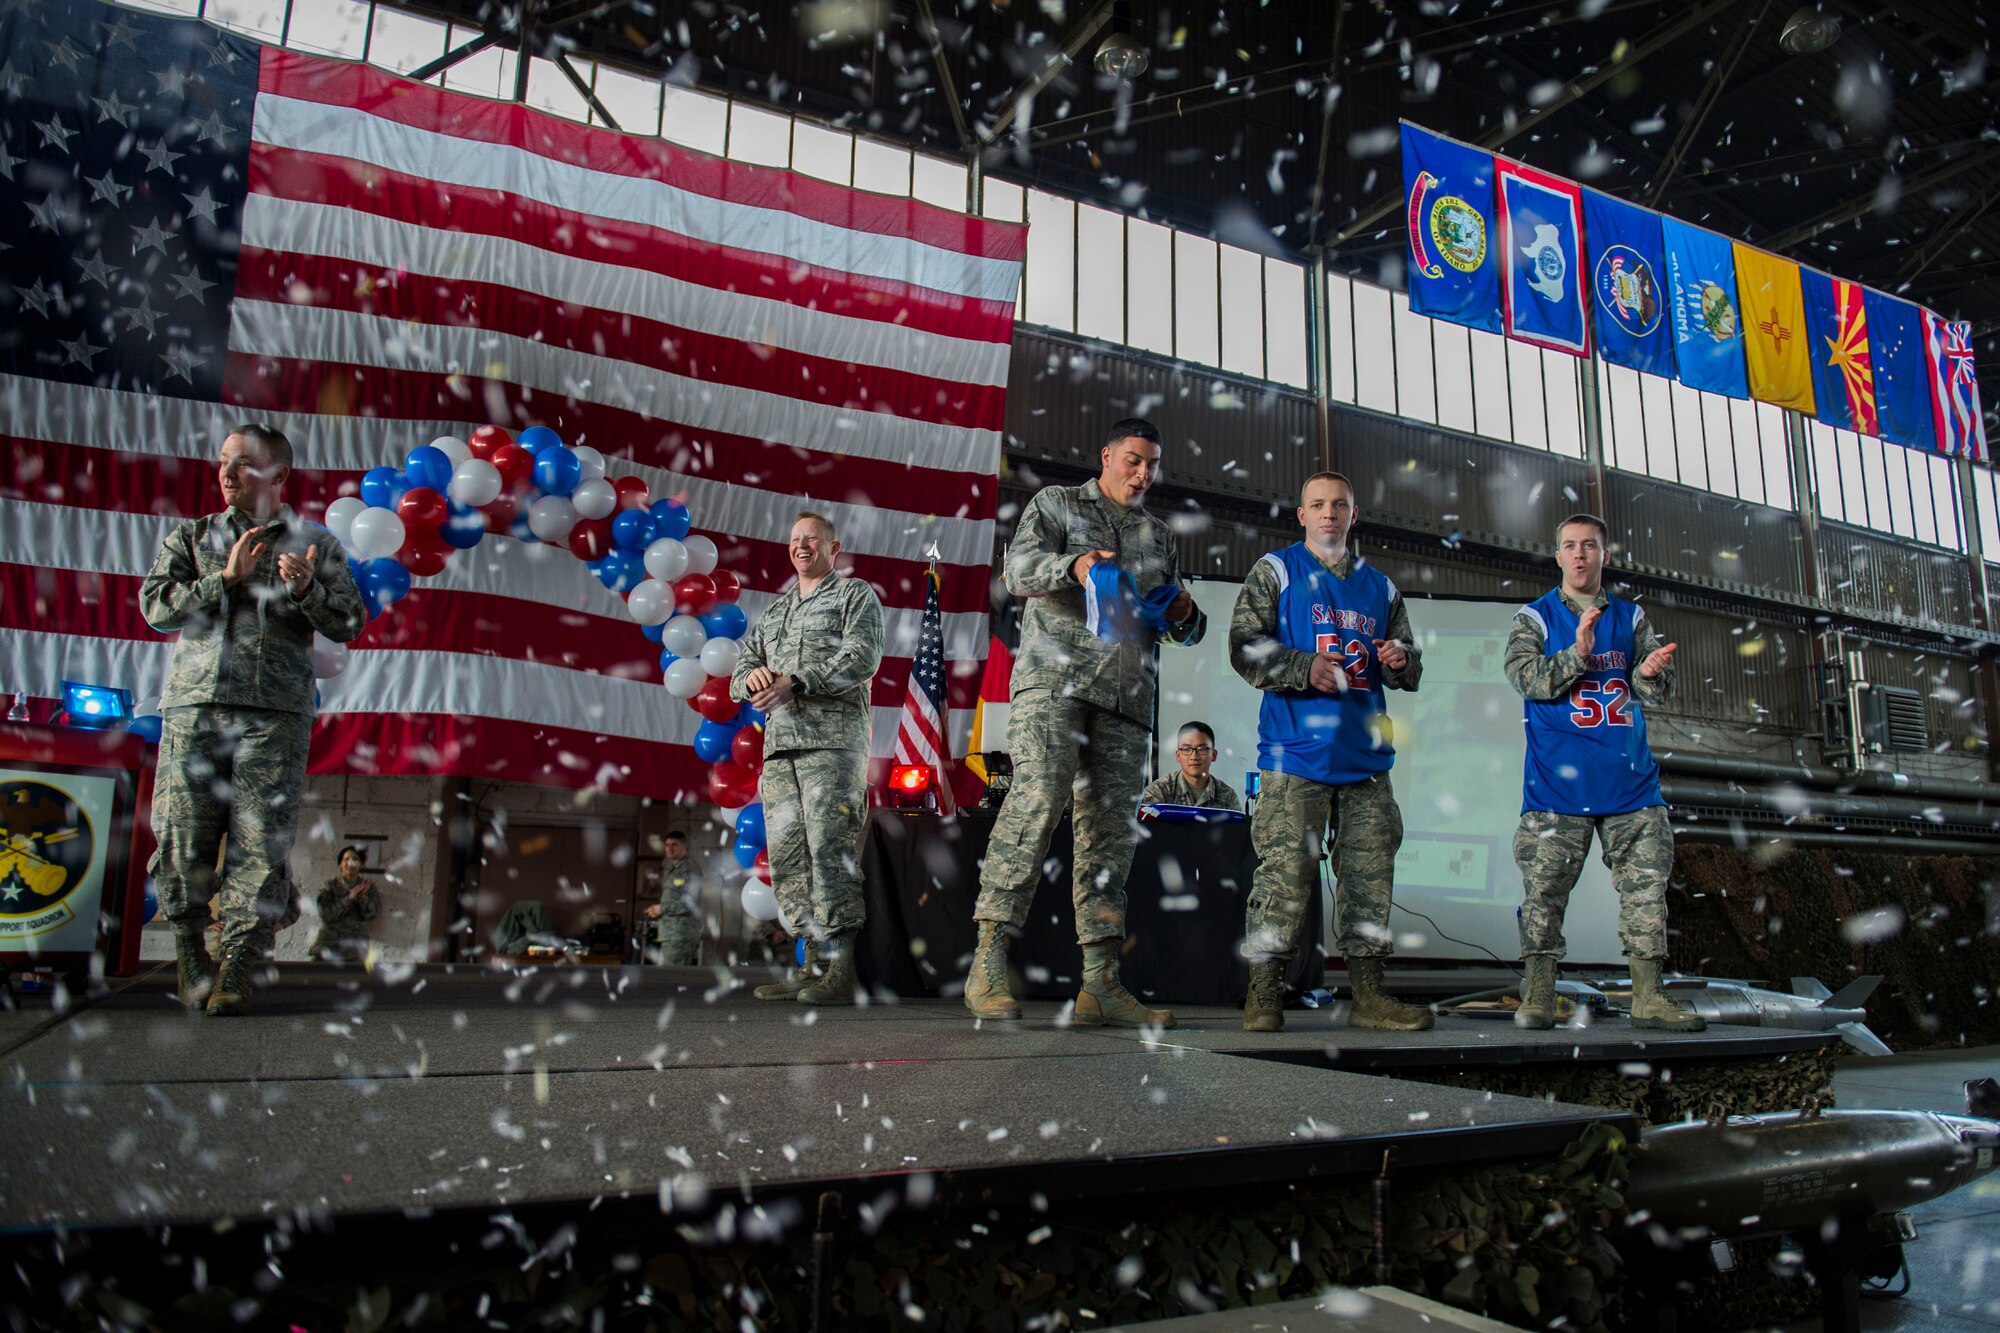 Spangdahlem Airmen cheer as some of the 52nd Fighter Wing 2015 annual awards nominees are recognized on stage at the Year in Review Pep Rally in Hangar 1 at Spangdahlem Air Base, Germany, Feb. 25, 2016. The annual awards winners will be announced at the Annual Awards Banquet at Club Eifel, Feb. 26, 2016. (U.S. Air Force photo by Airman 1st Class Luke Kitterman/Released)